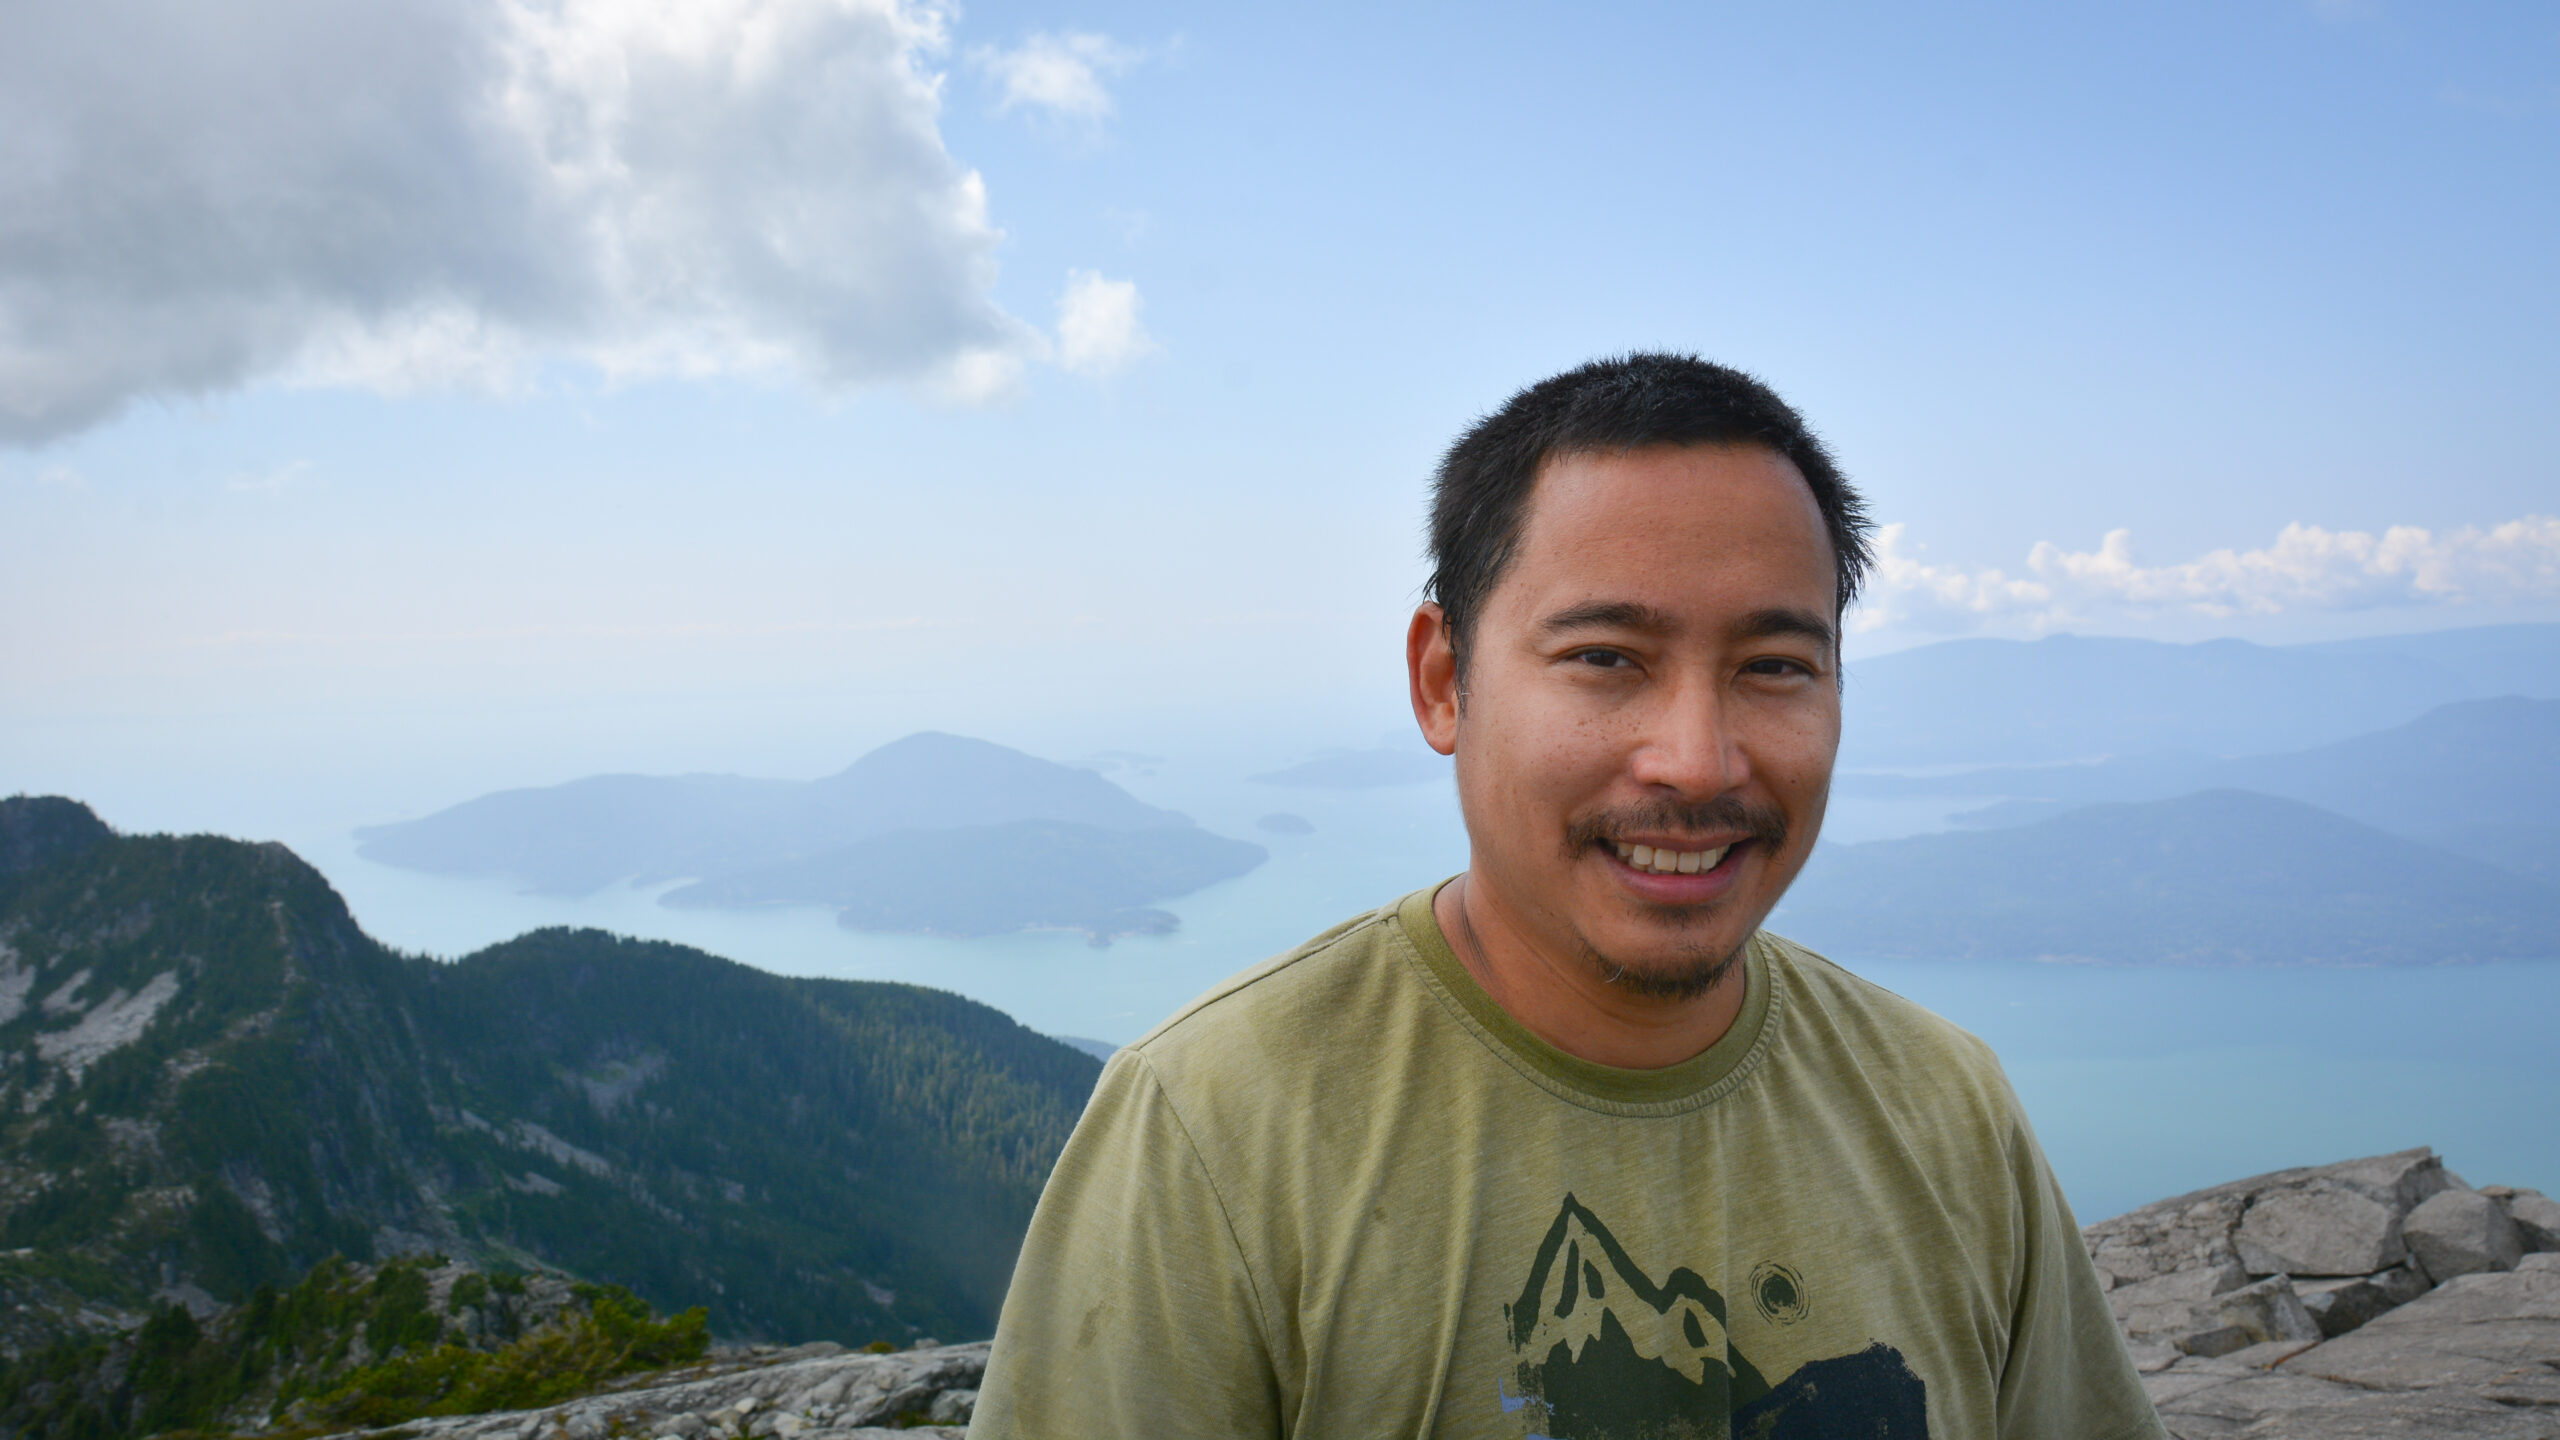 Stephen Hui is looking into the camera smiling. He is standing atop Twin Sisters. Mountains, water, and a blue sky is behind him.